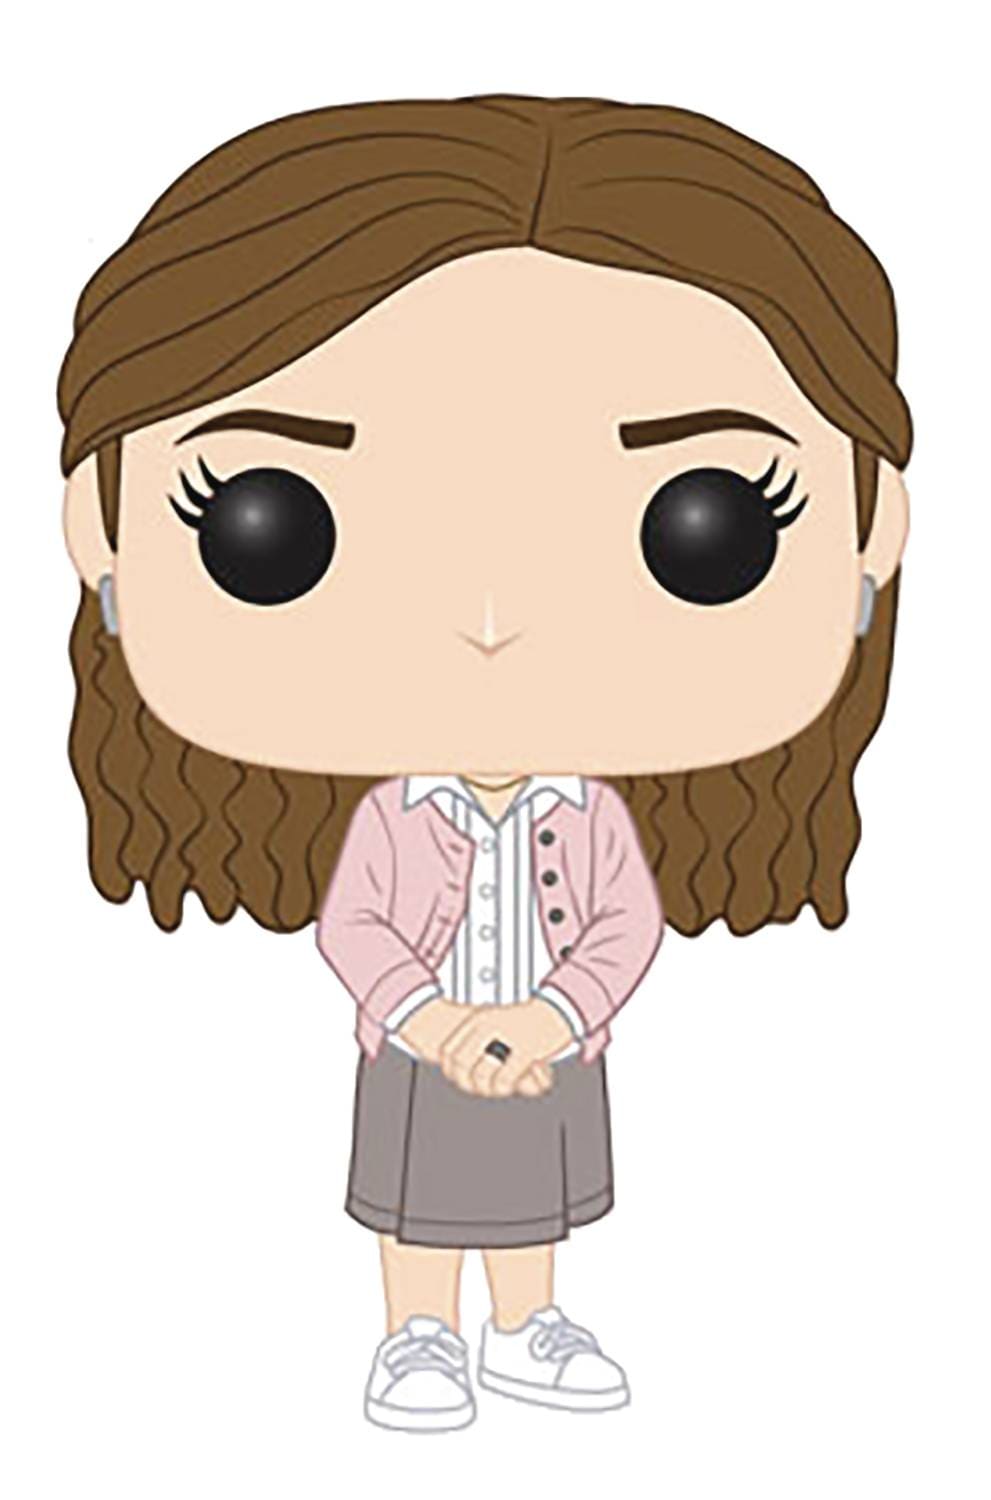 Funko Pop!: The Office - Pam Beesly